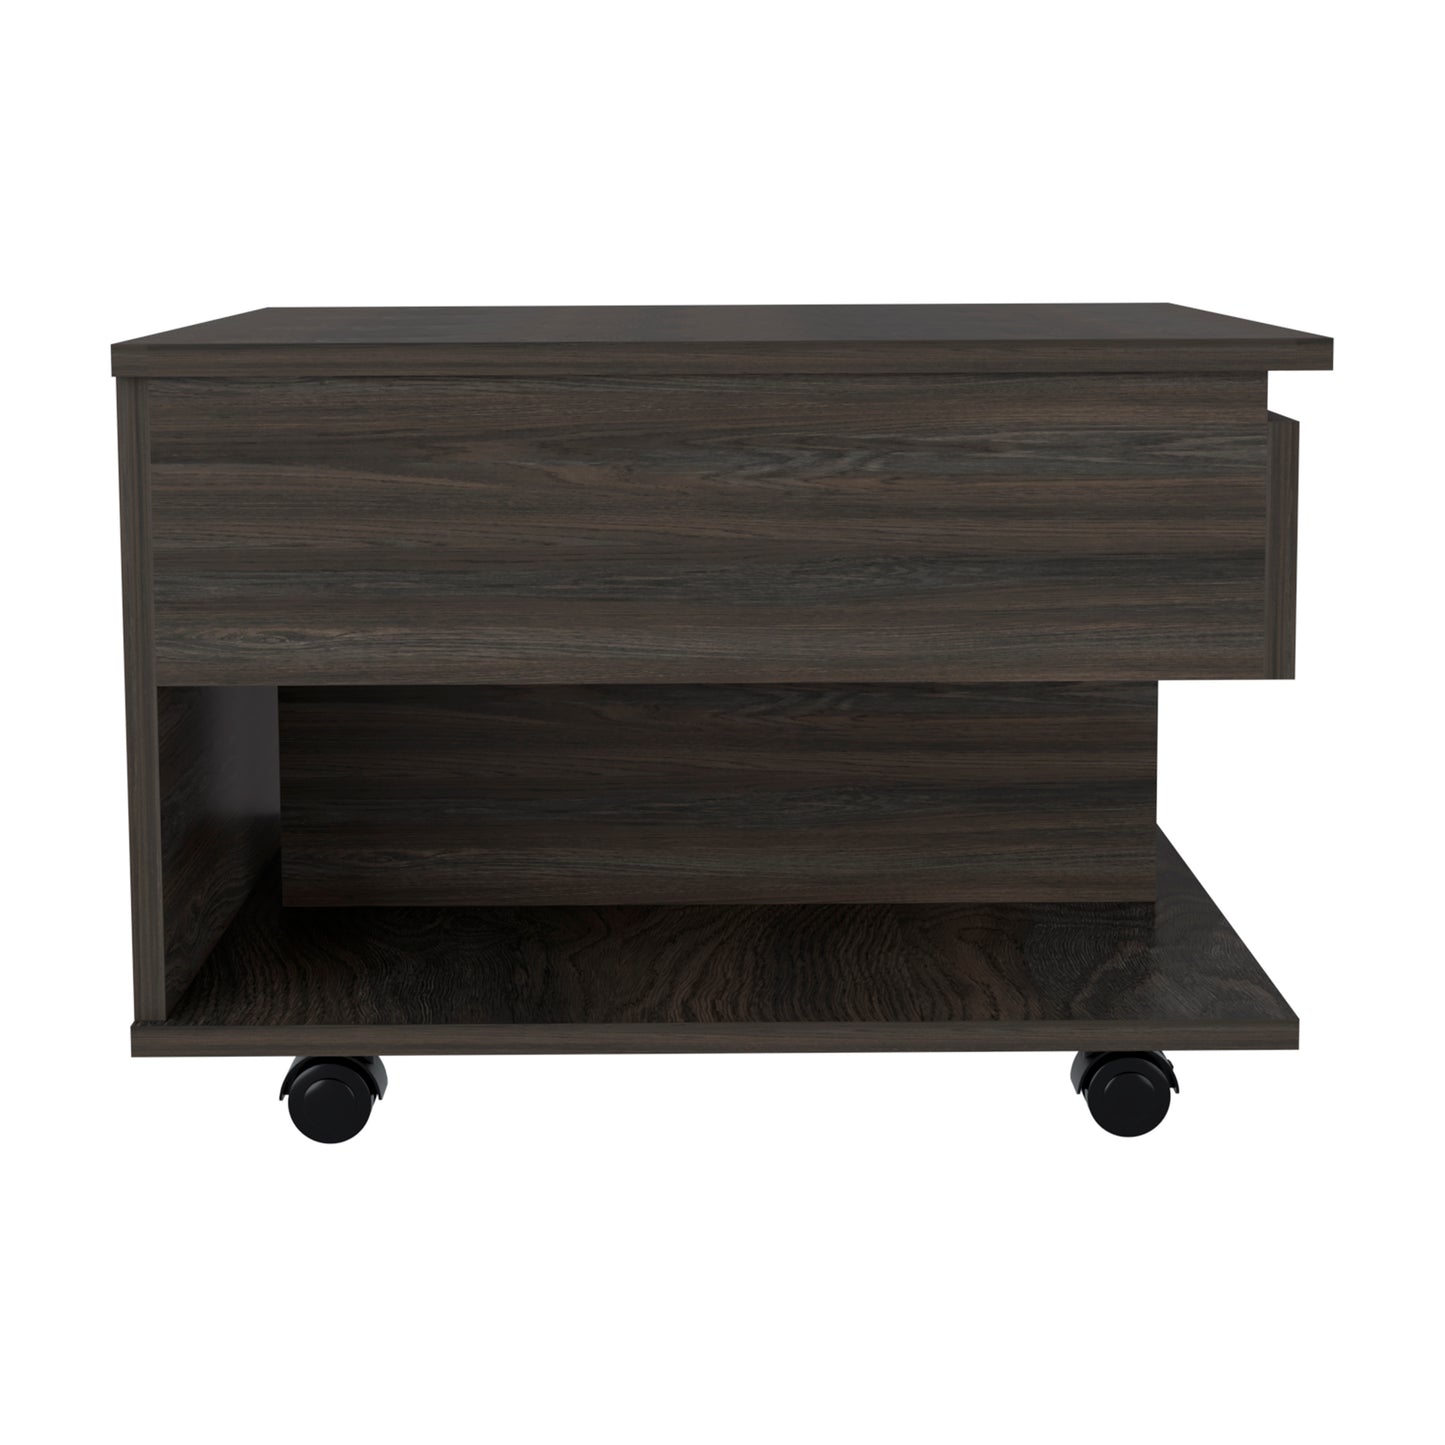 Elevate Espresso Lift Top Coffee Table with Casters and Shelf